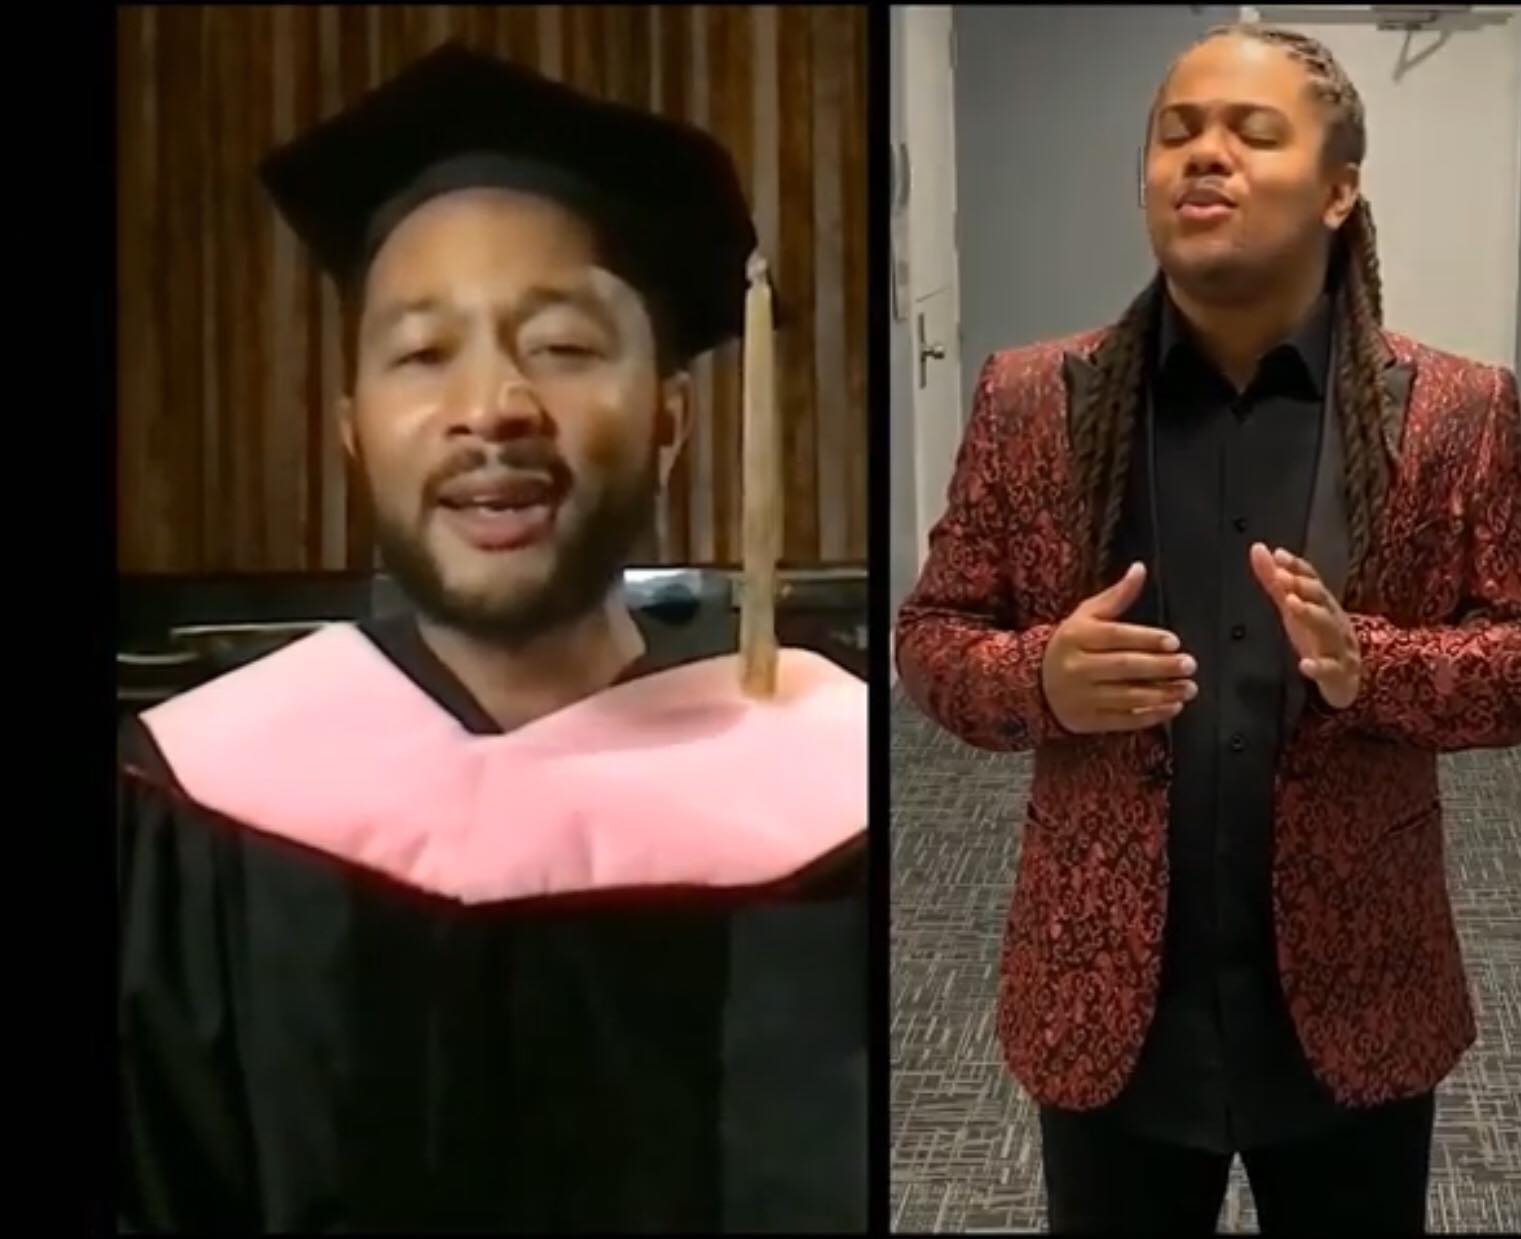 Harris, a Music Business/Management graduate of Berklee Online, sings lead vocals in John Legend's tribute at the virtual Commencement concert. 